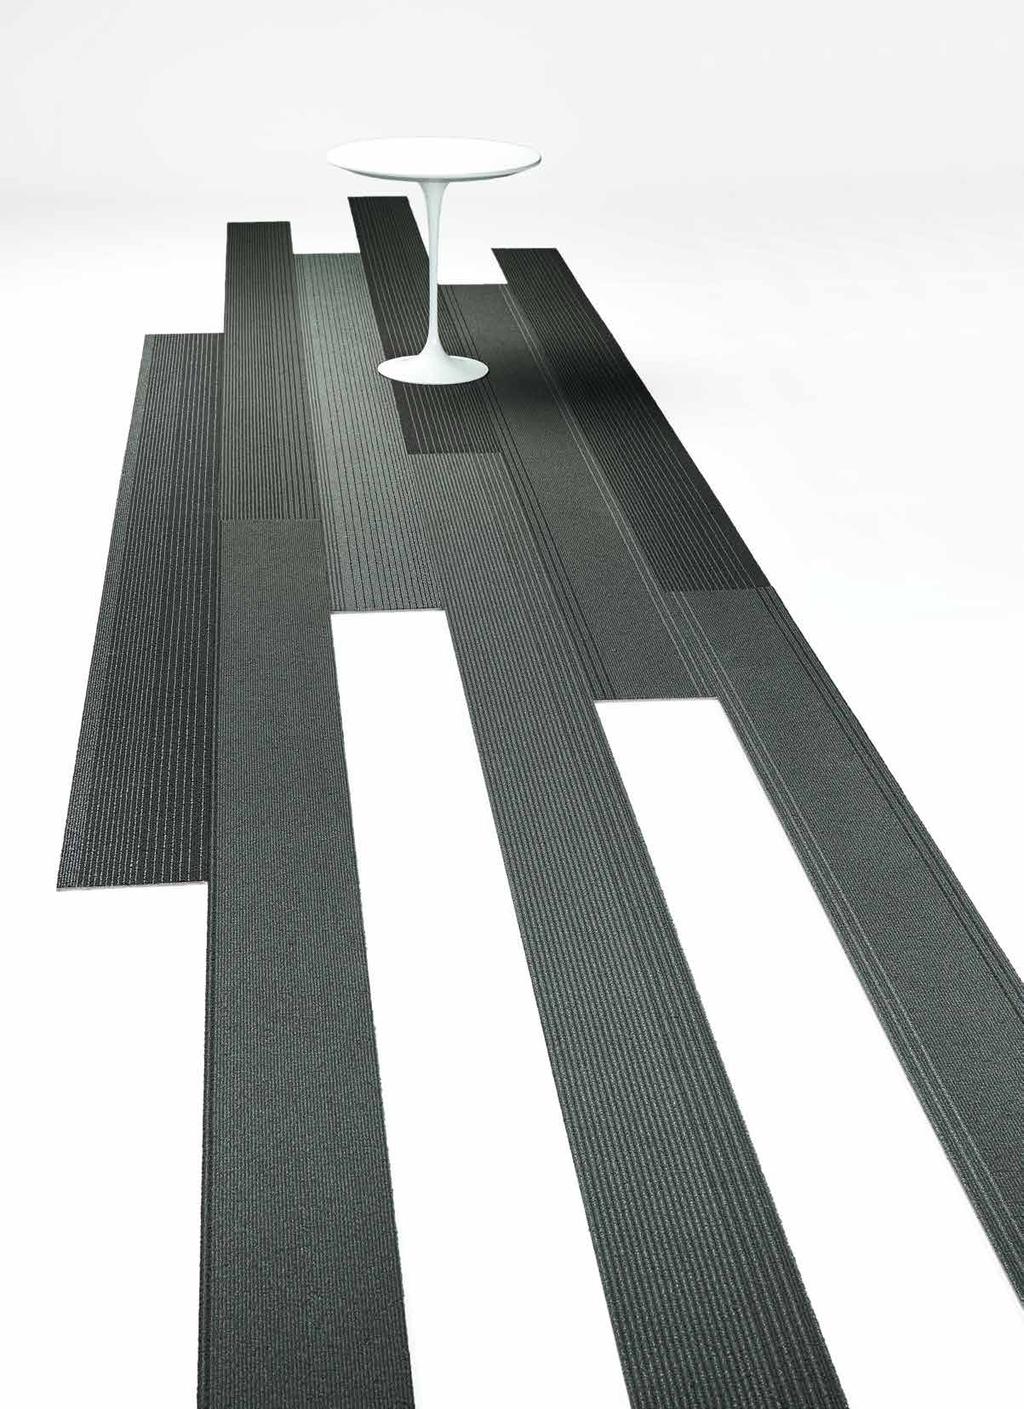 FREEFORM : FACTORY FLOOR freeform BENEFITS This innovative platform offers a precision cut, free lay, acoustical flooring solution for quick refresh and access needs.